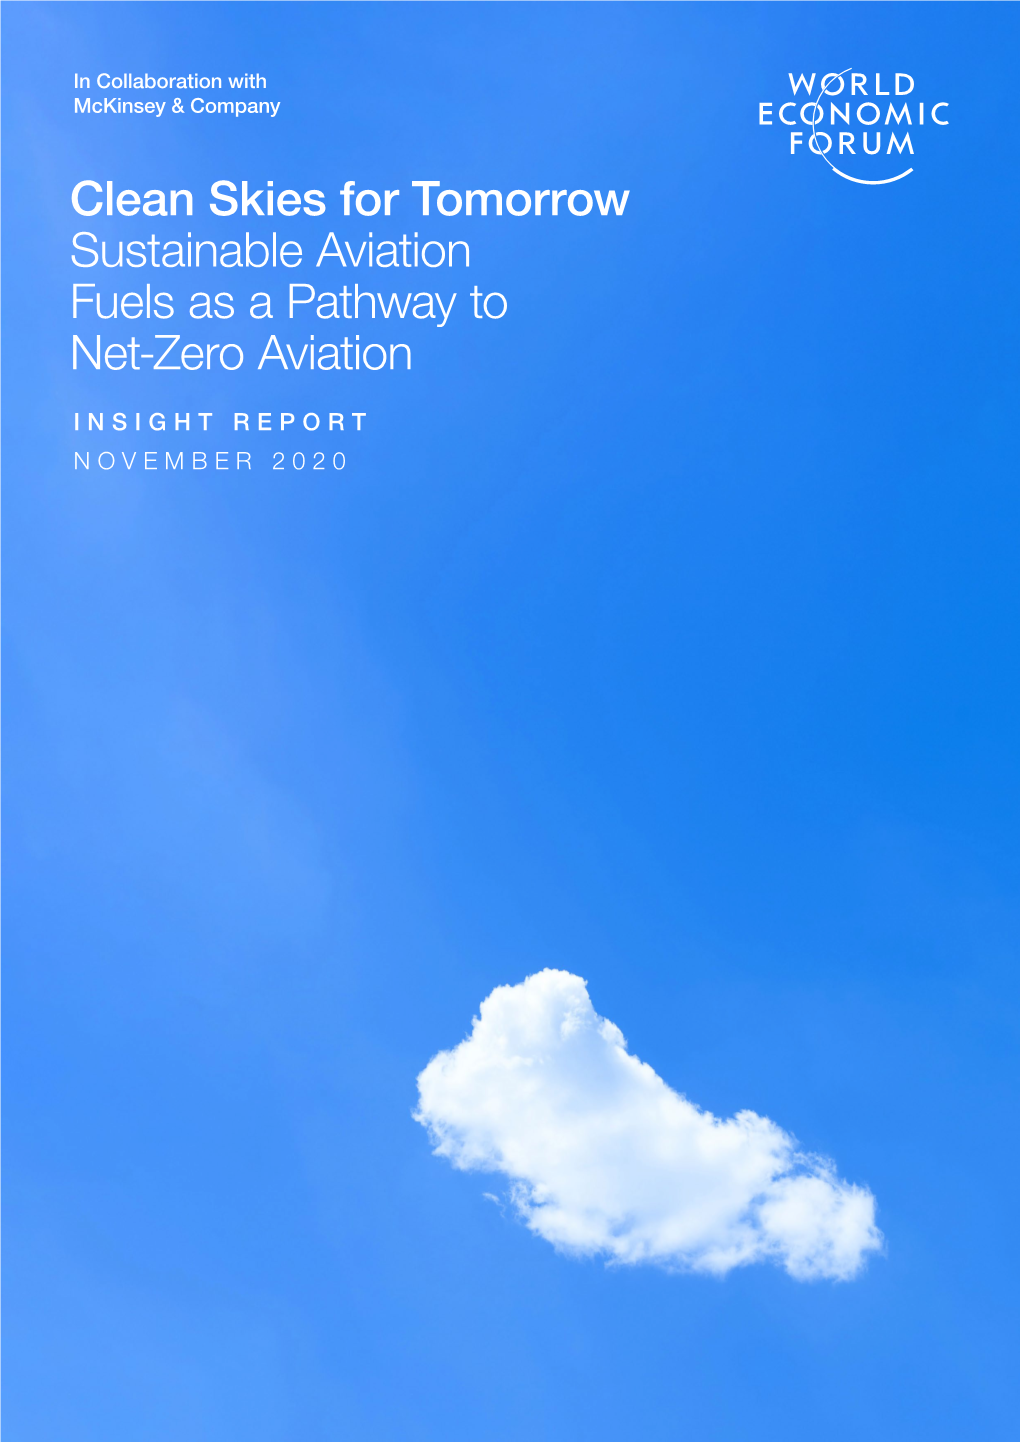 Clean Skies for Tomorrow: Sustainable Aviation Fuels As a Pathway to Net-Zero Aviation 2 Contents